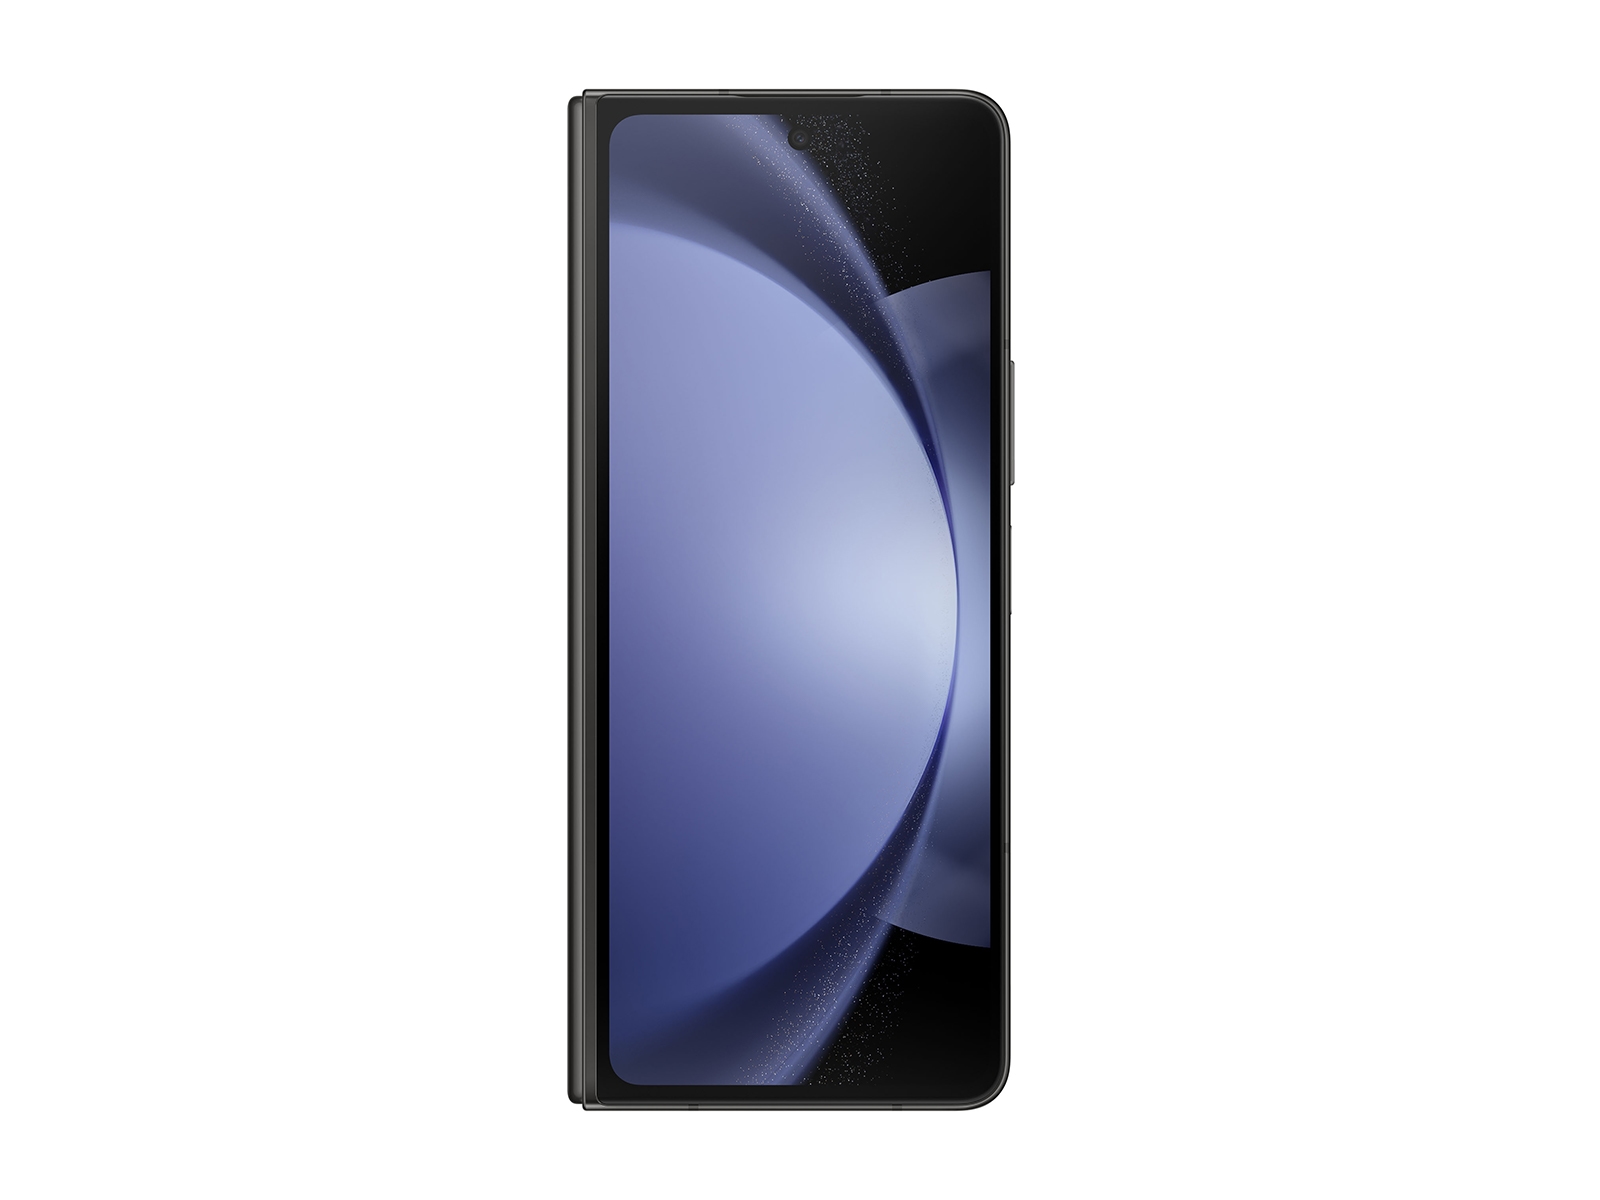 Buying a Samsung Galaxy Z Fold 5? Make sure to order this model